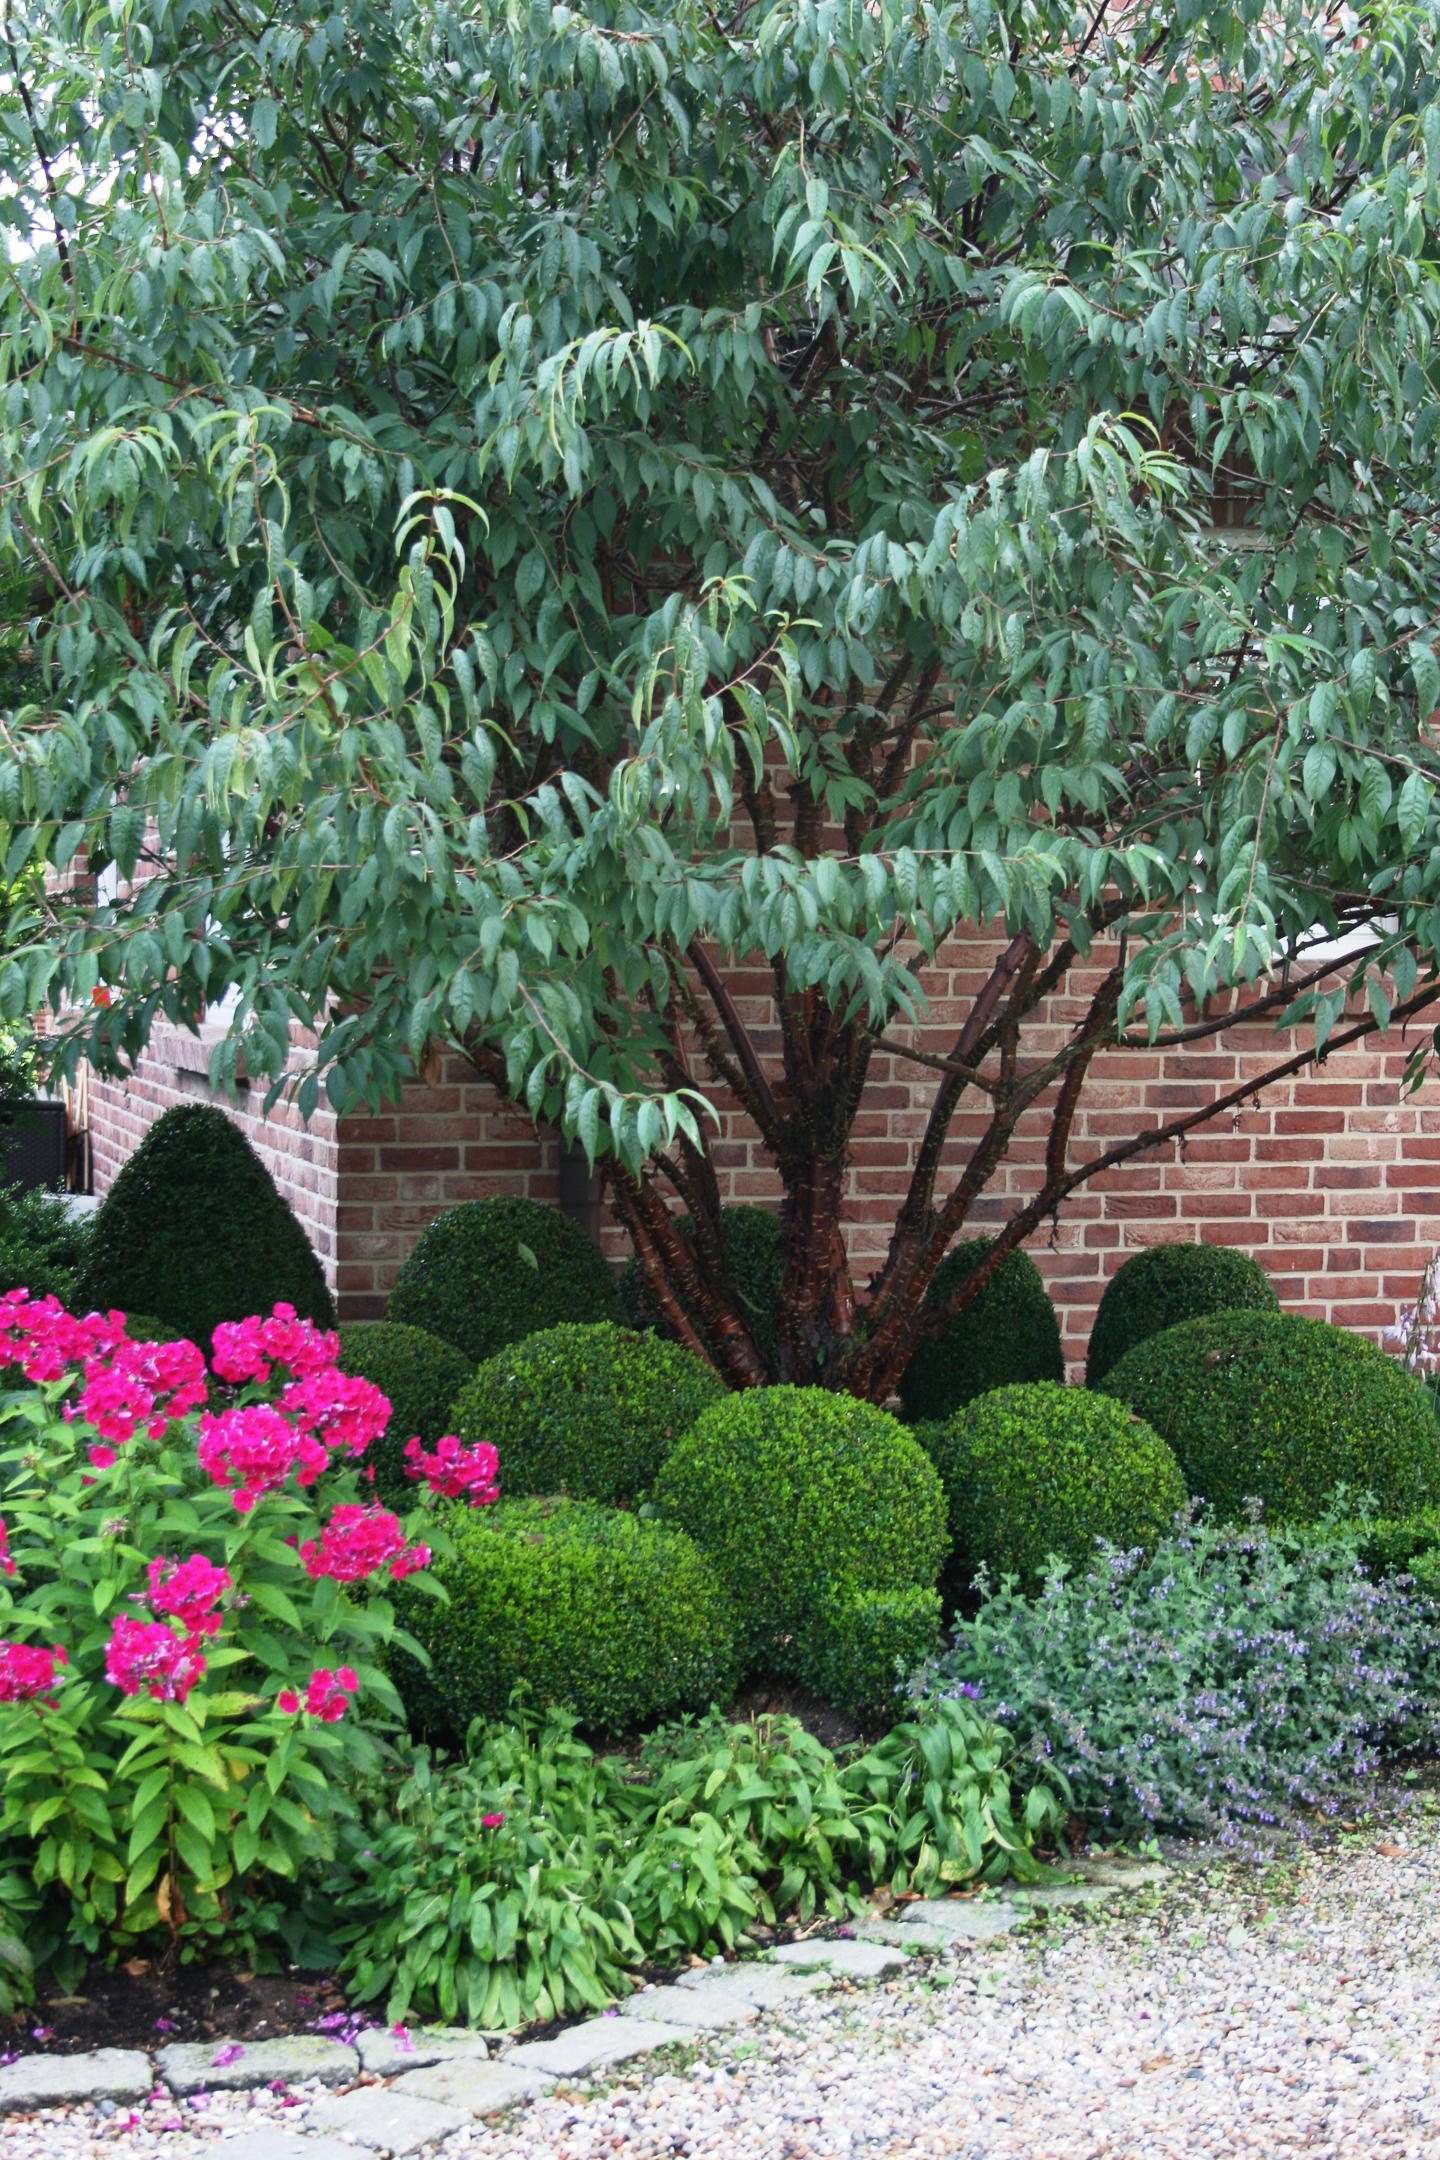 Pruned boxwoods growing under a tree 